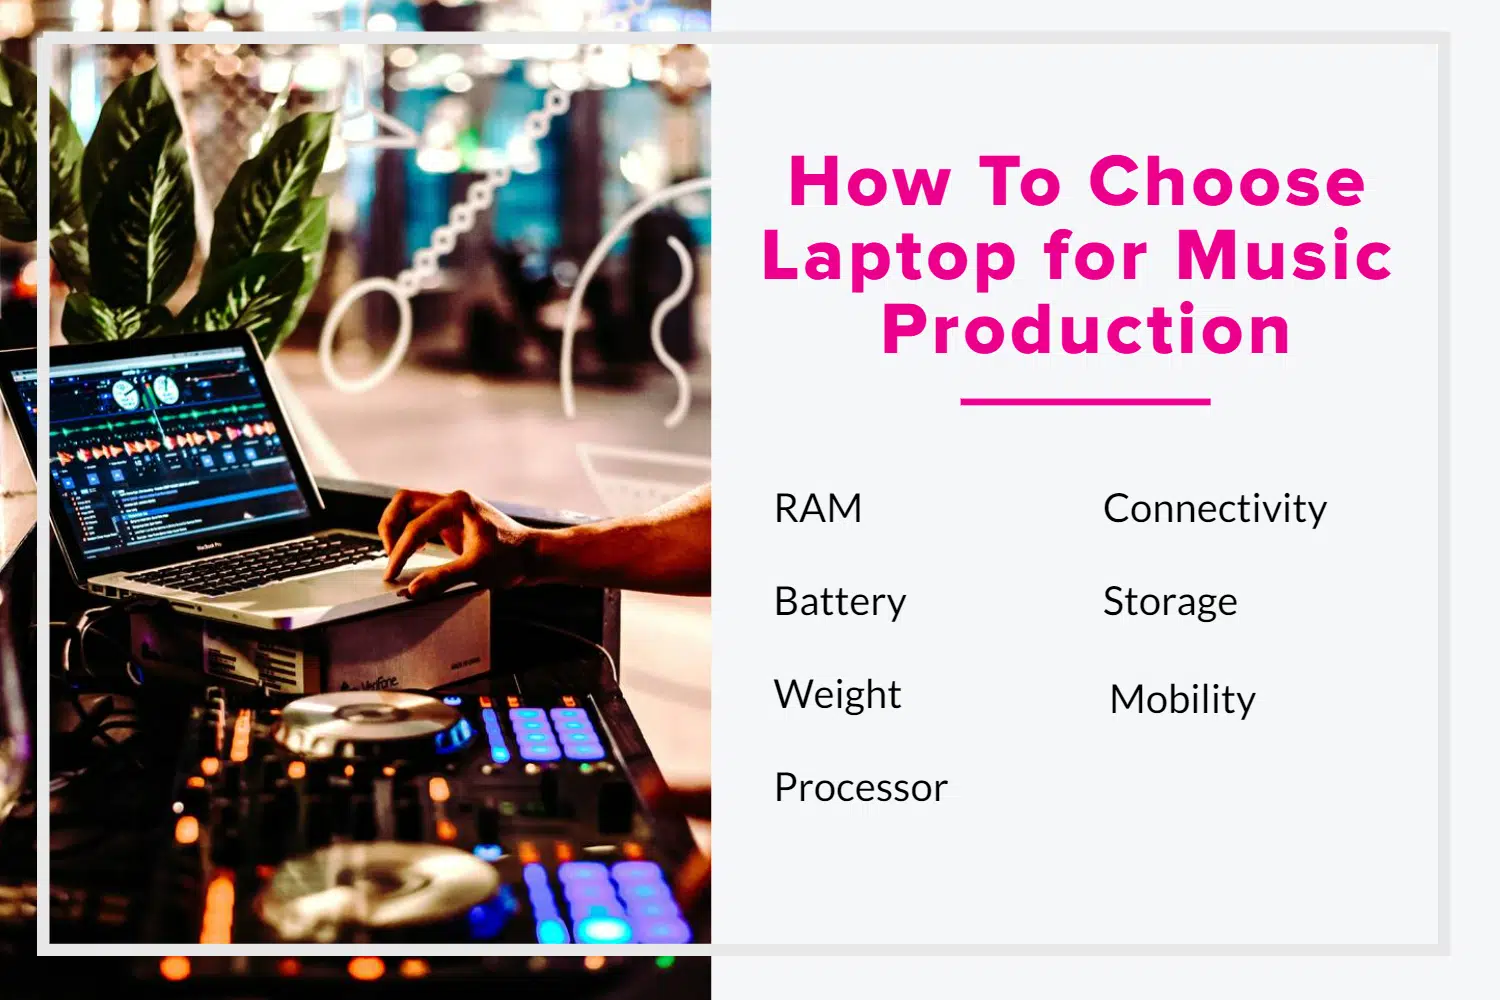 How To Choose the Right Laptop for Music Production